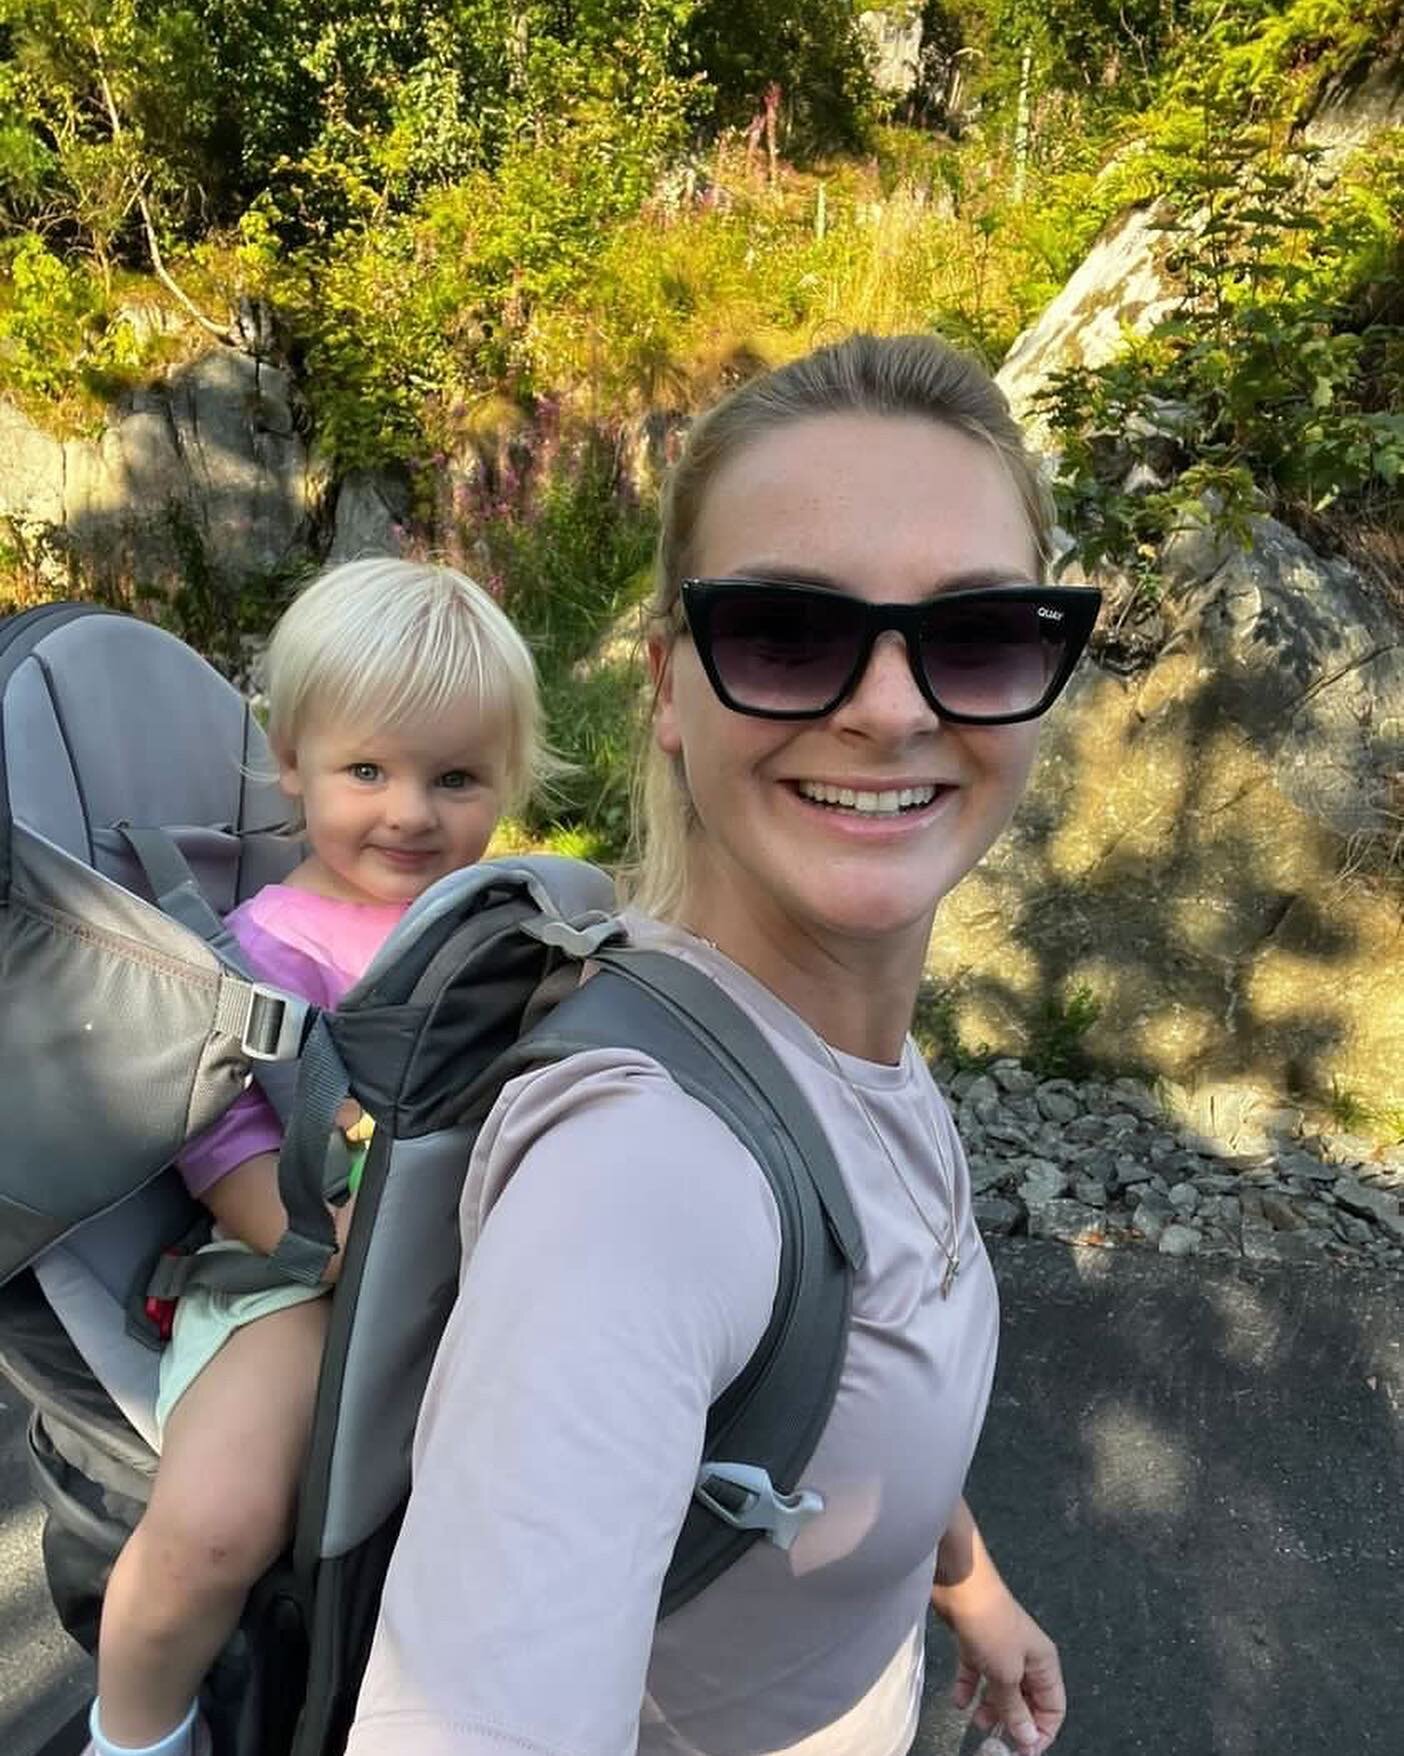 Family time! ❤️ @bashishkina has been hiking from Gr&oslash;nnes to Raulibukta. Check out these awesome photos! ❤️
 
Photographer: @bashishkina 🤩💫

#gr&oslash;nnes #visitflekkefjord #flekkefjord #visitsorlandet #magmageopark #visitnorway #Norge #No